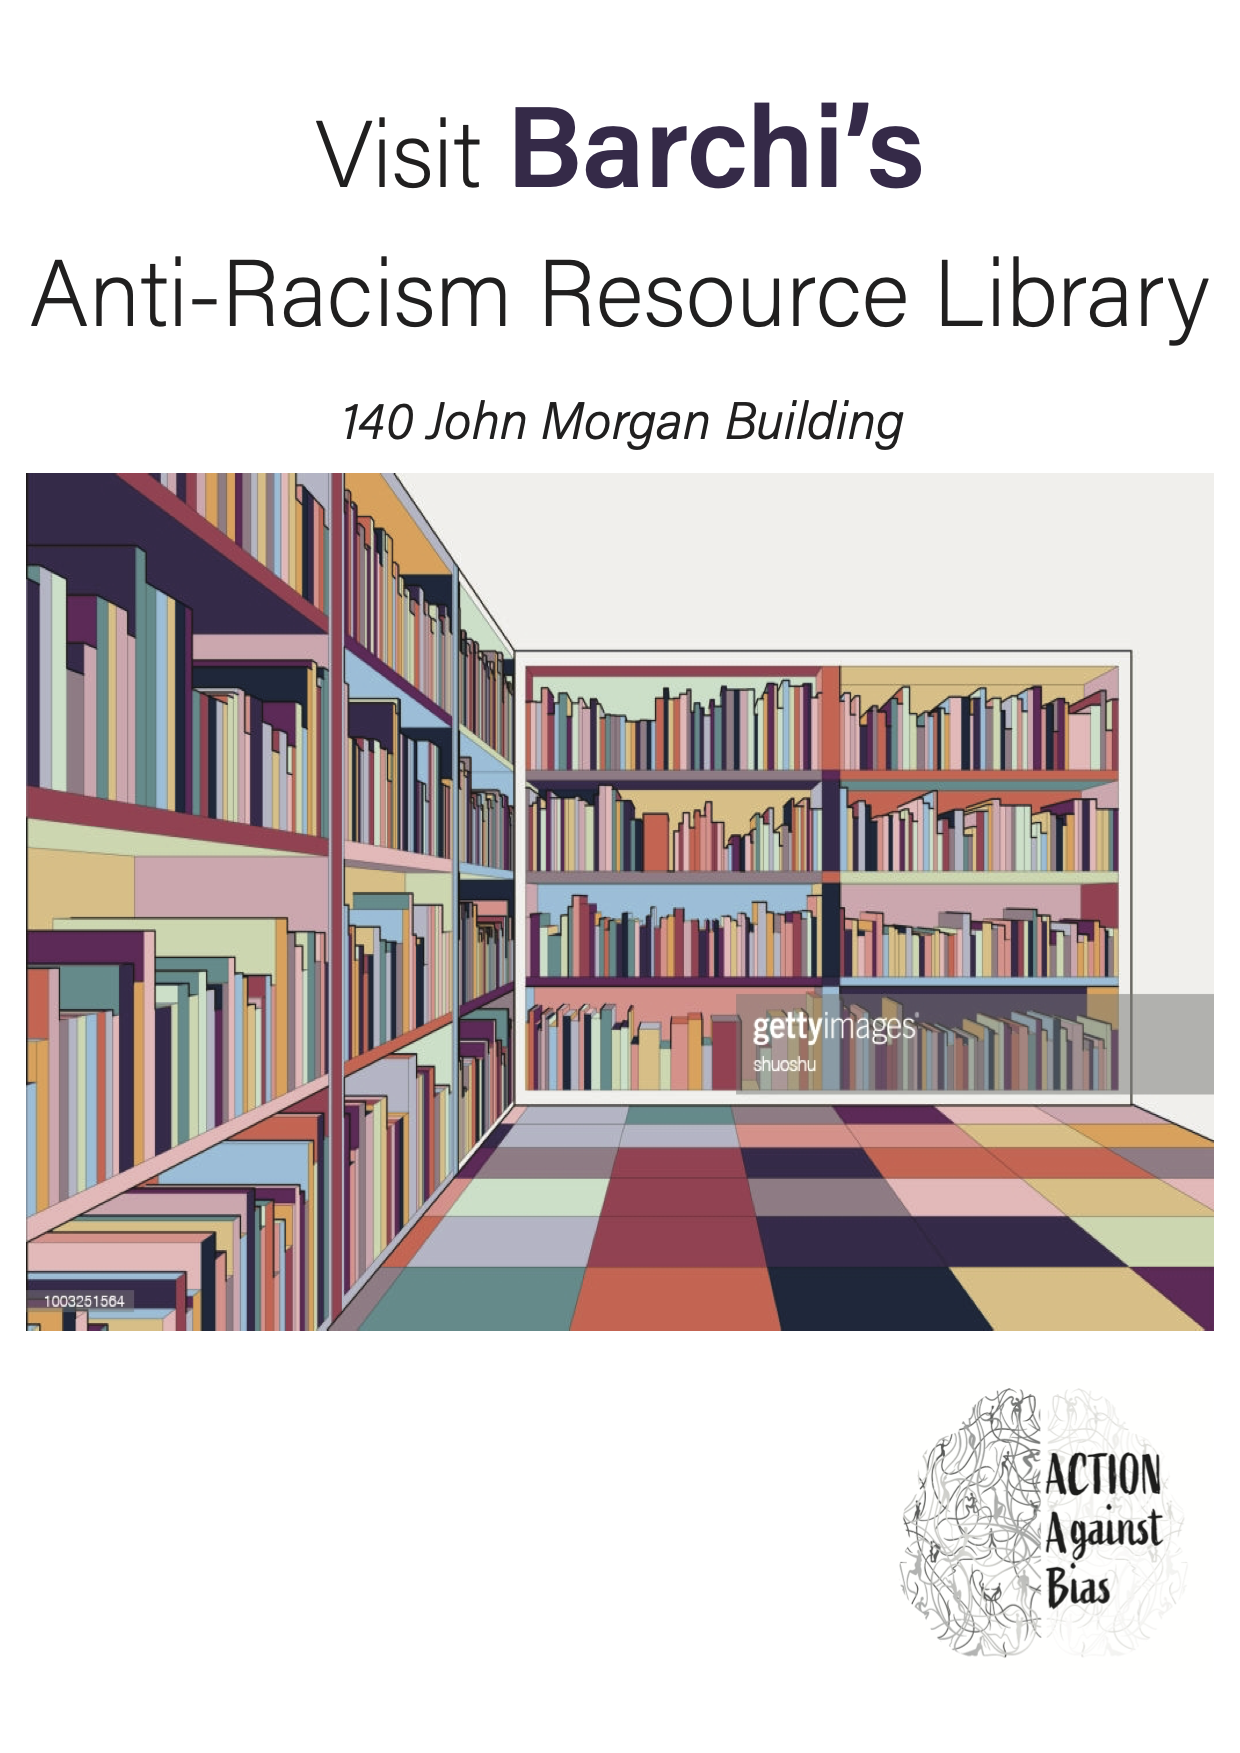 BarchiLibrary.png